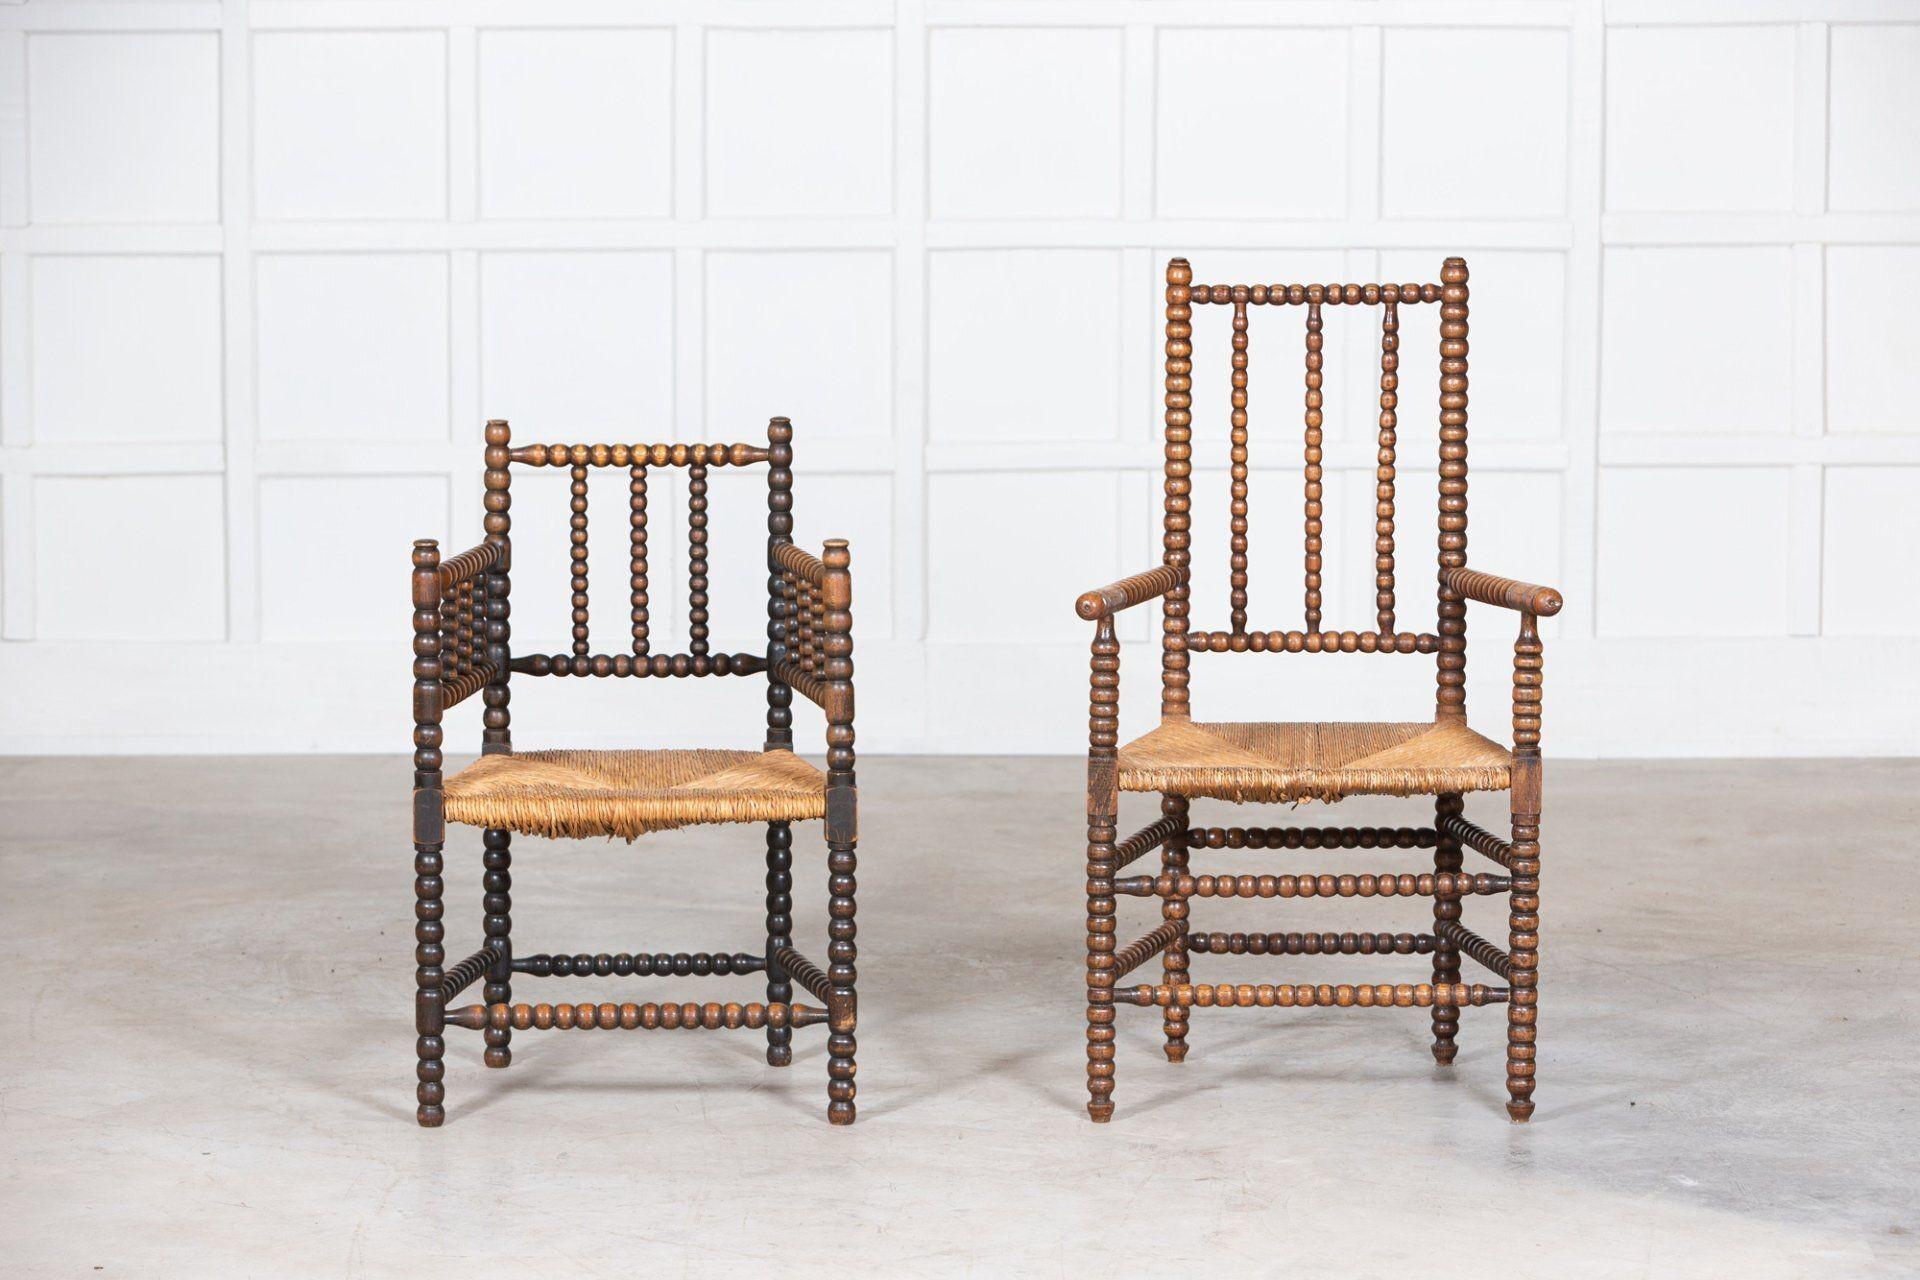 circa 1890
Near Pair 19thC Oak Arts & Crafts Bobbin Armchairs
His & Her William & Mary manner chairs. Each arm chair with bobbin turned oak backs, legs & supports with woven rush seats
sku 1212

Price for the pair
Small W55 x D41 x H88 cm
seat